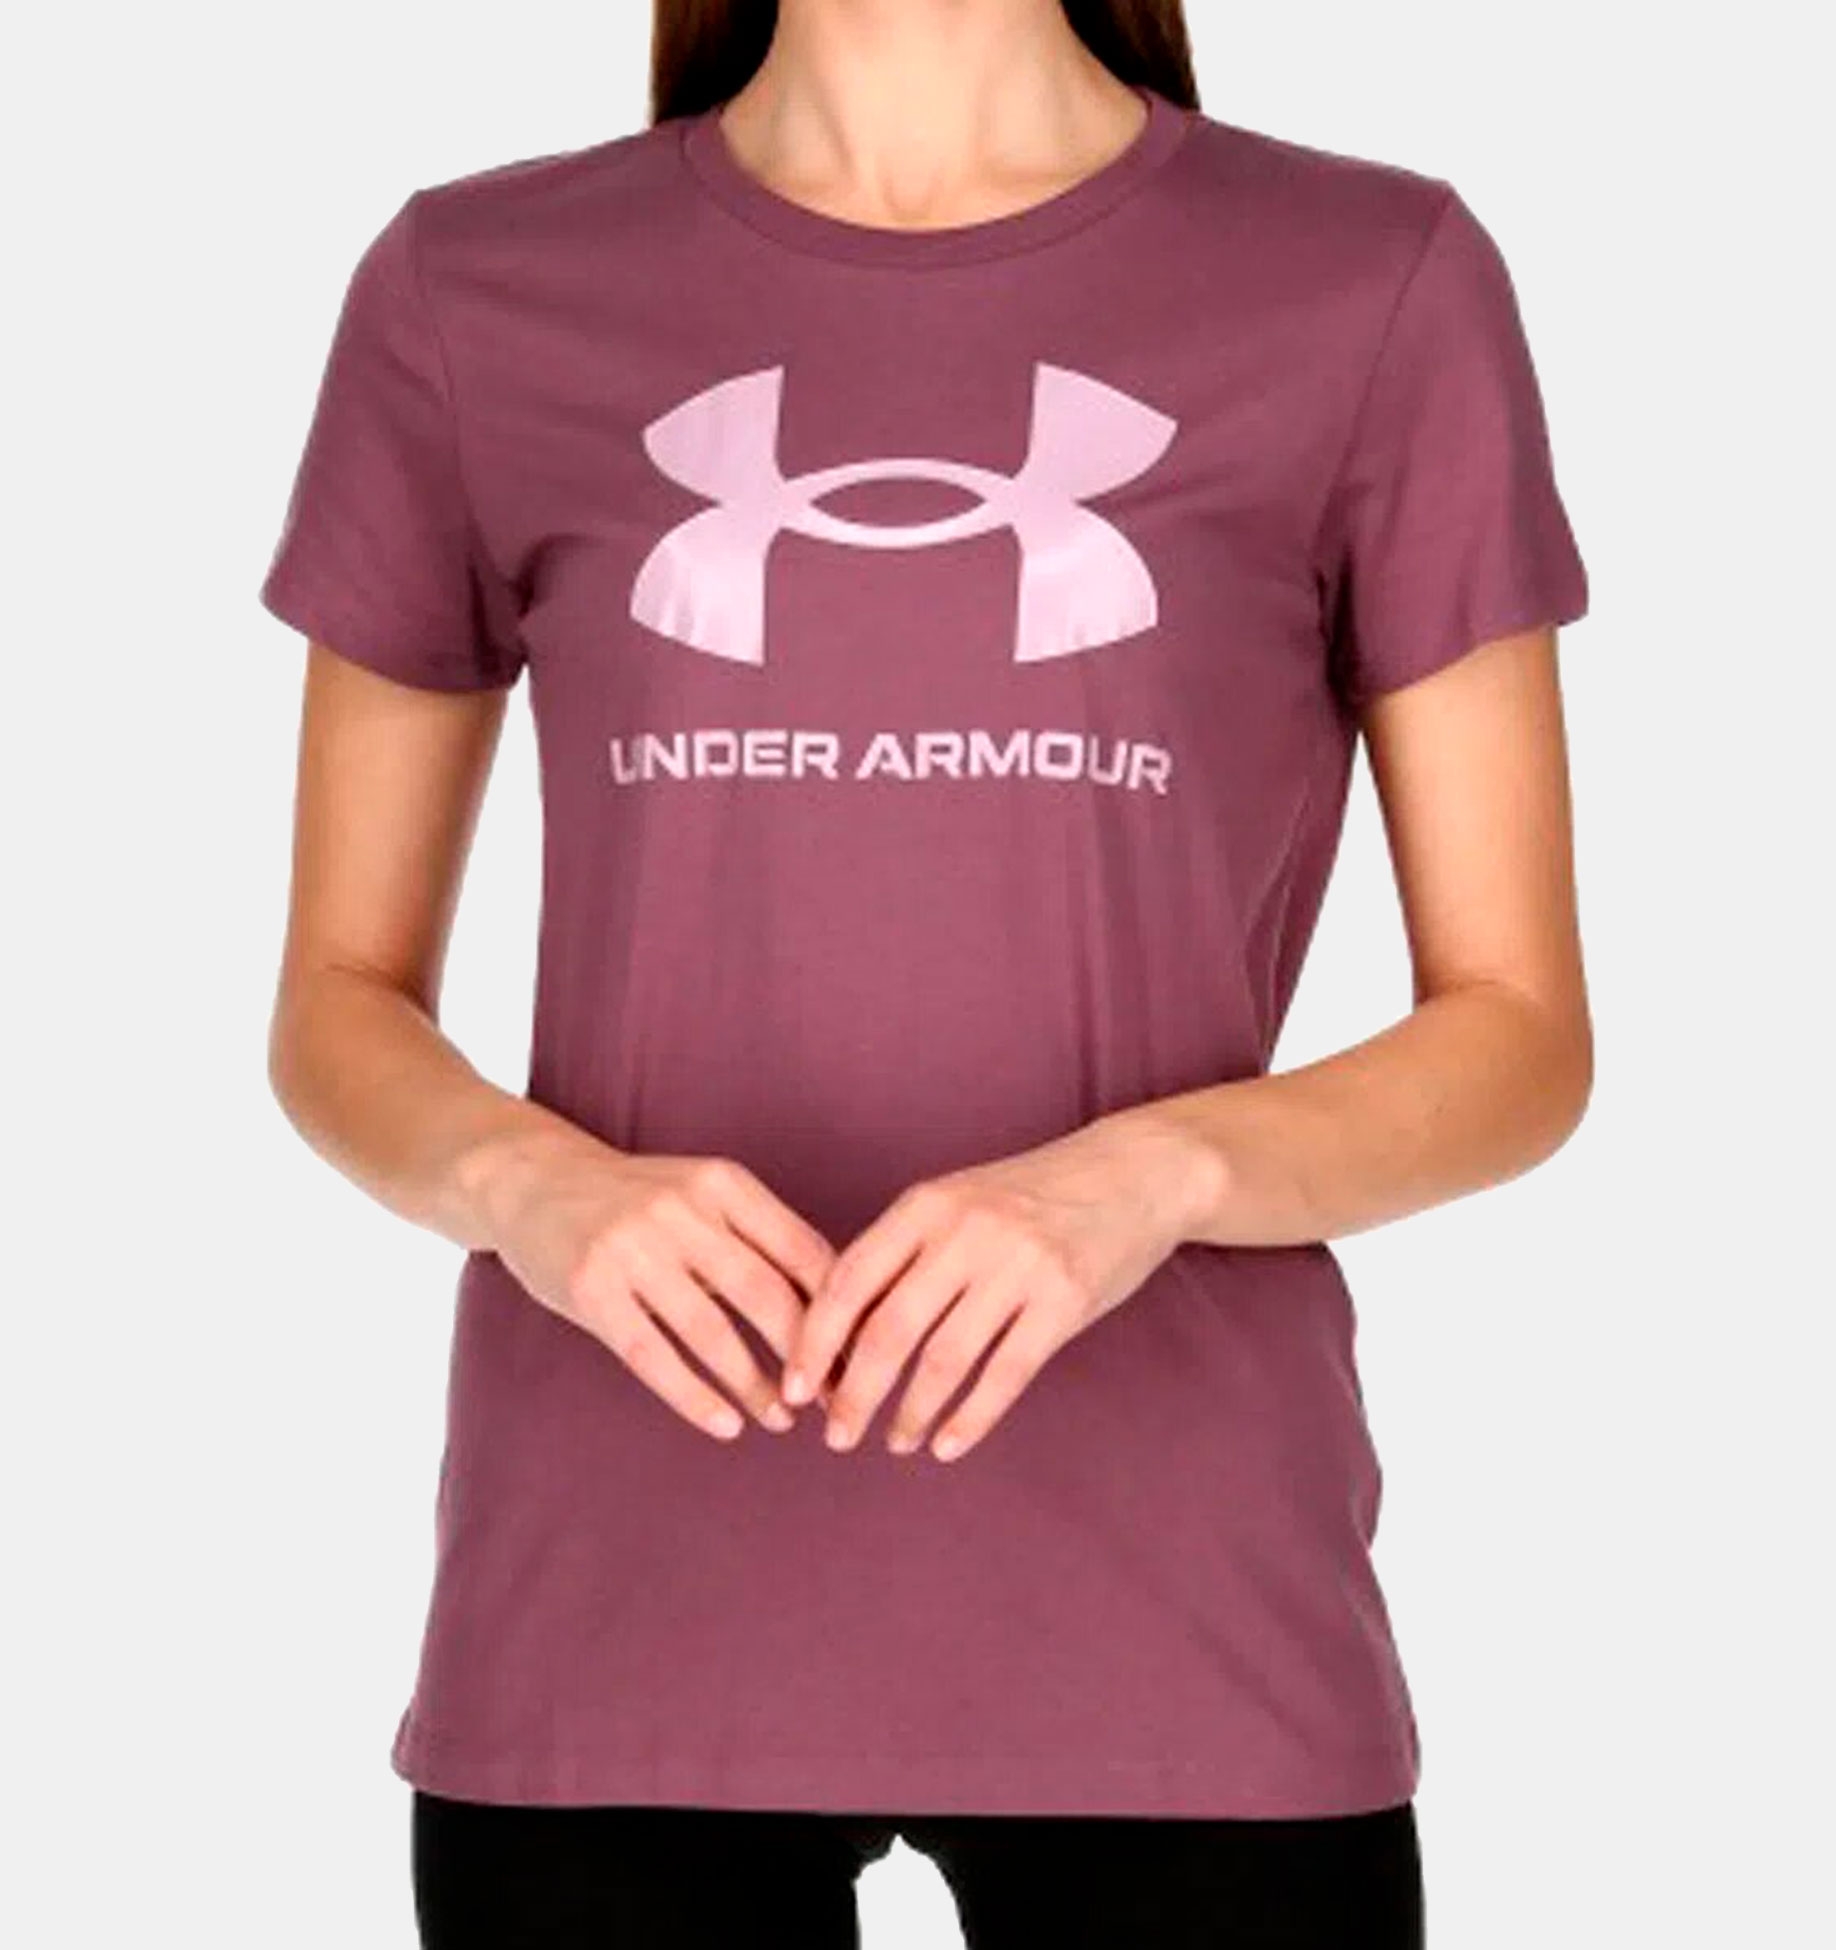 Under Armour Remera Live Oversized Gp Tee Mujer - 1371516819